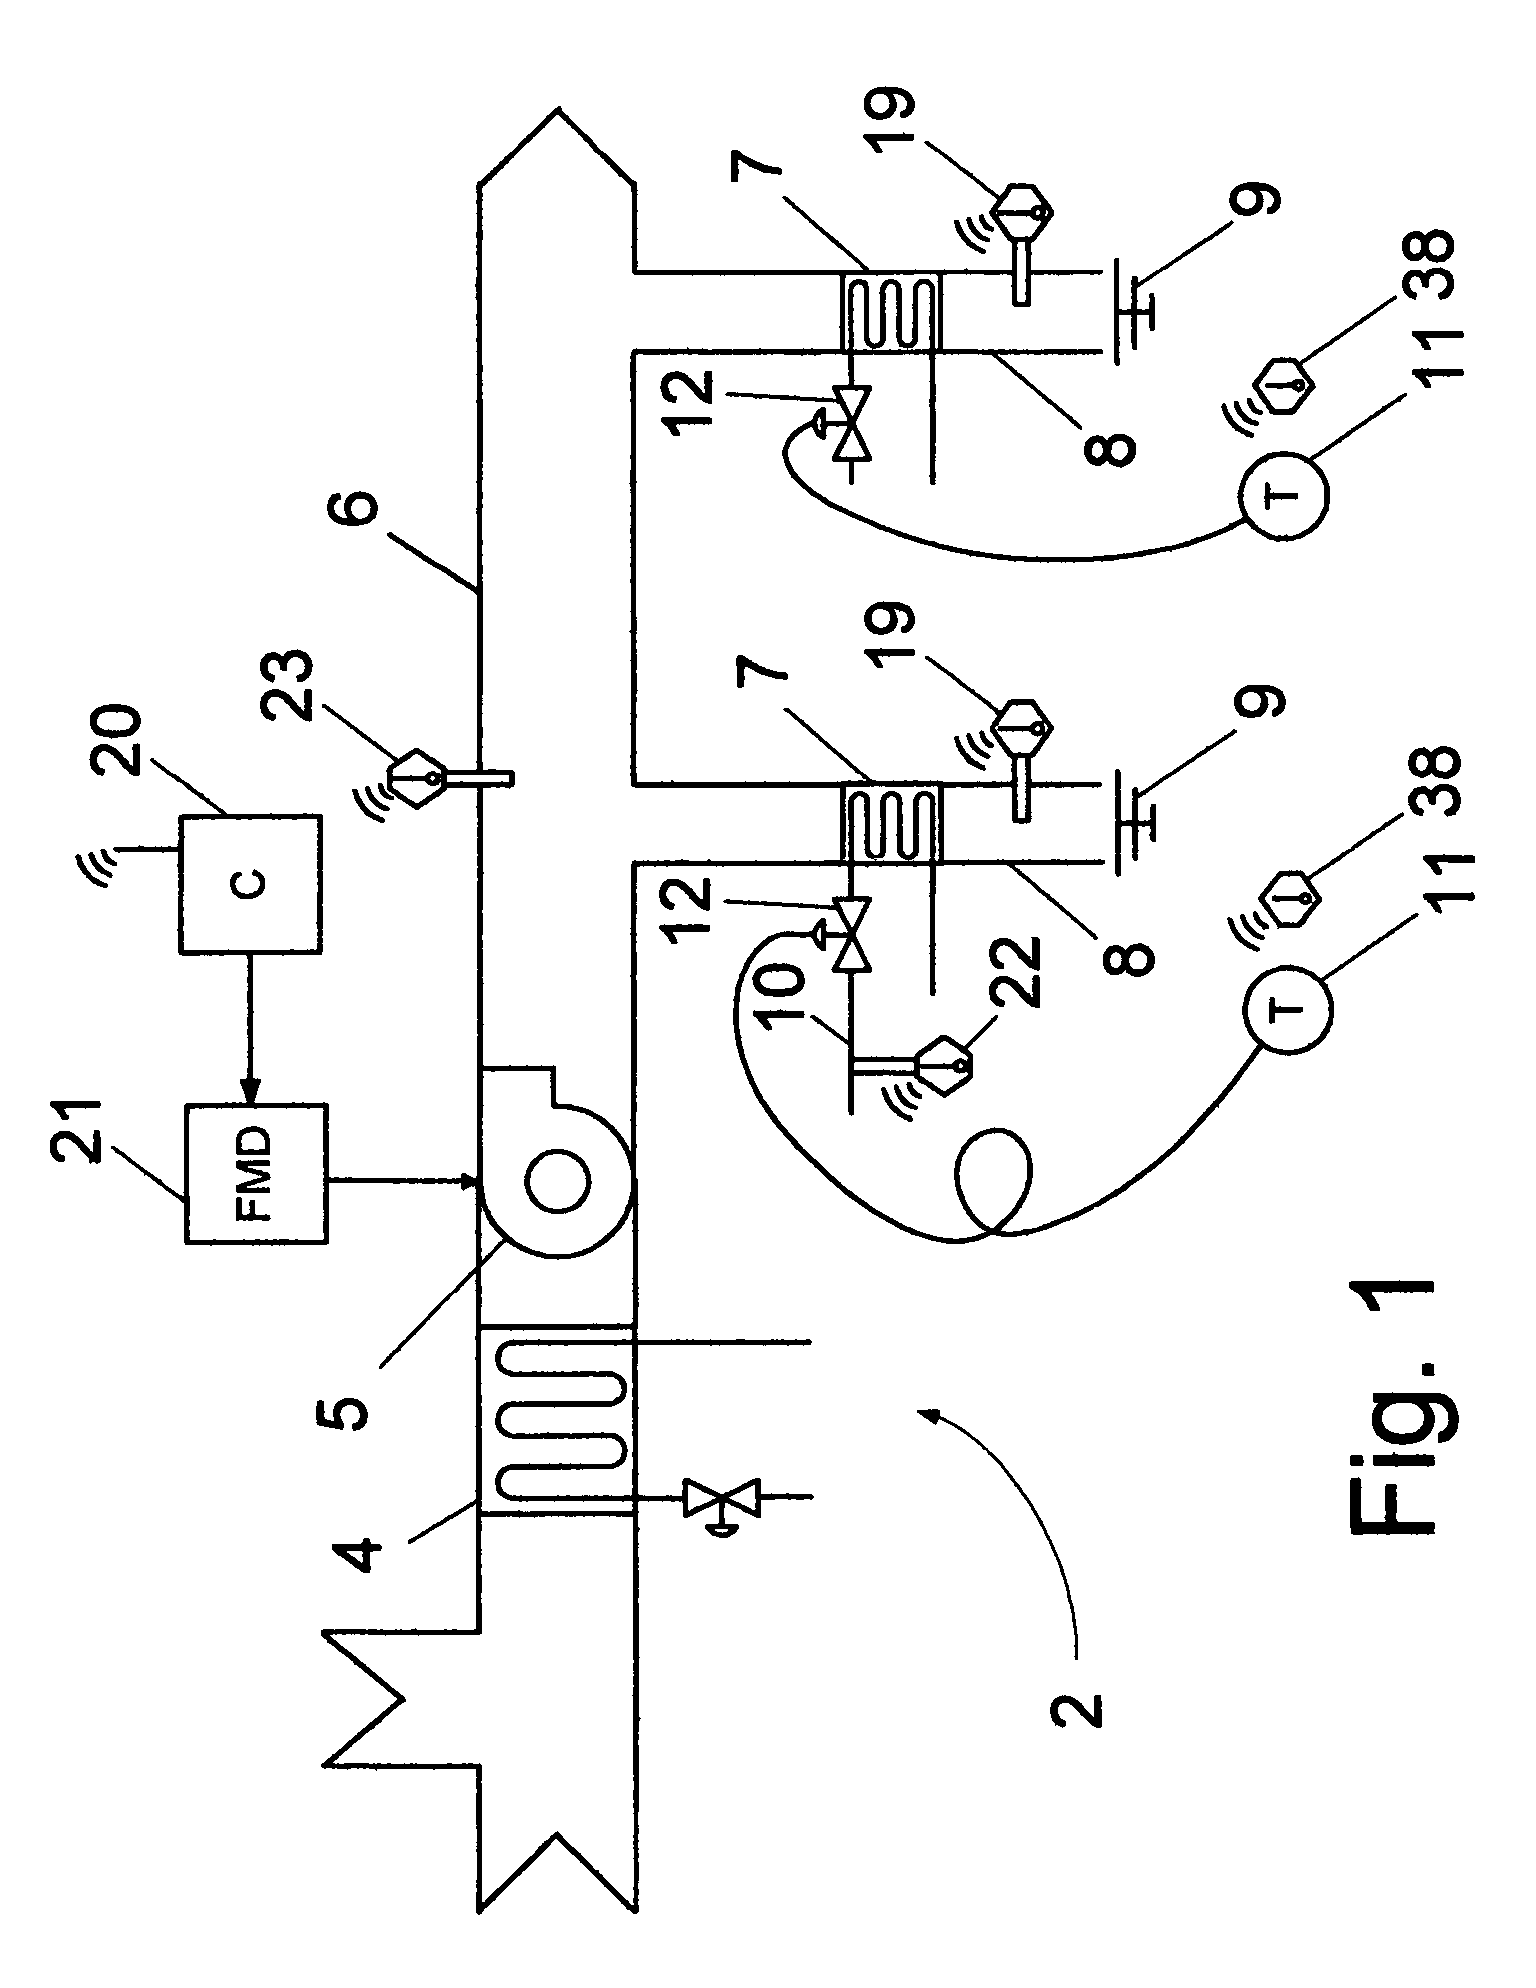 Method and apparatus for converting constant-volume supply fans to variable flow operation